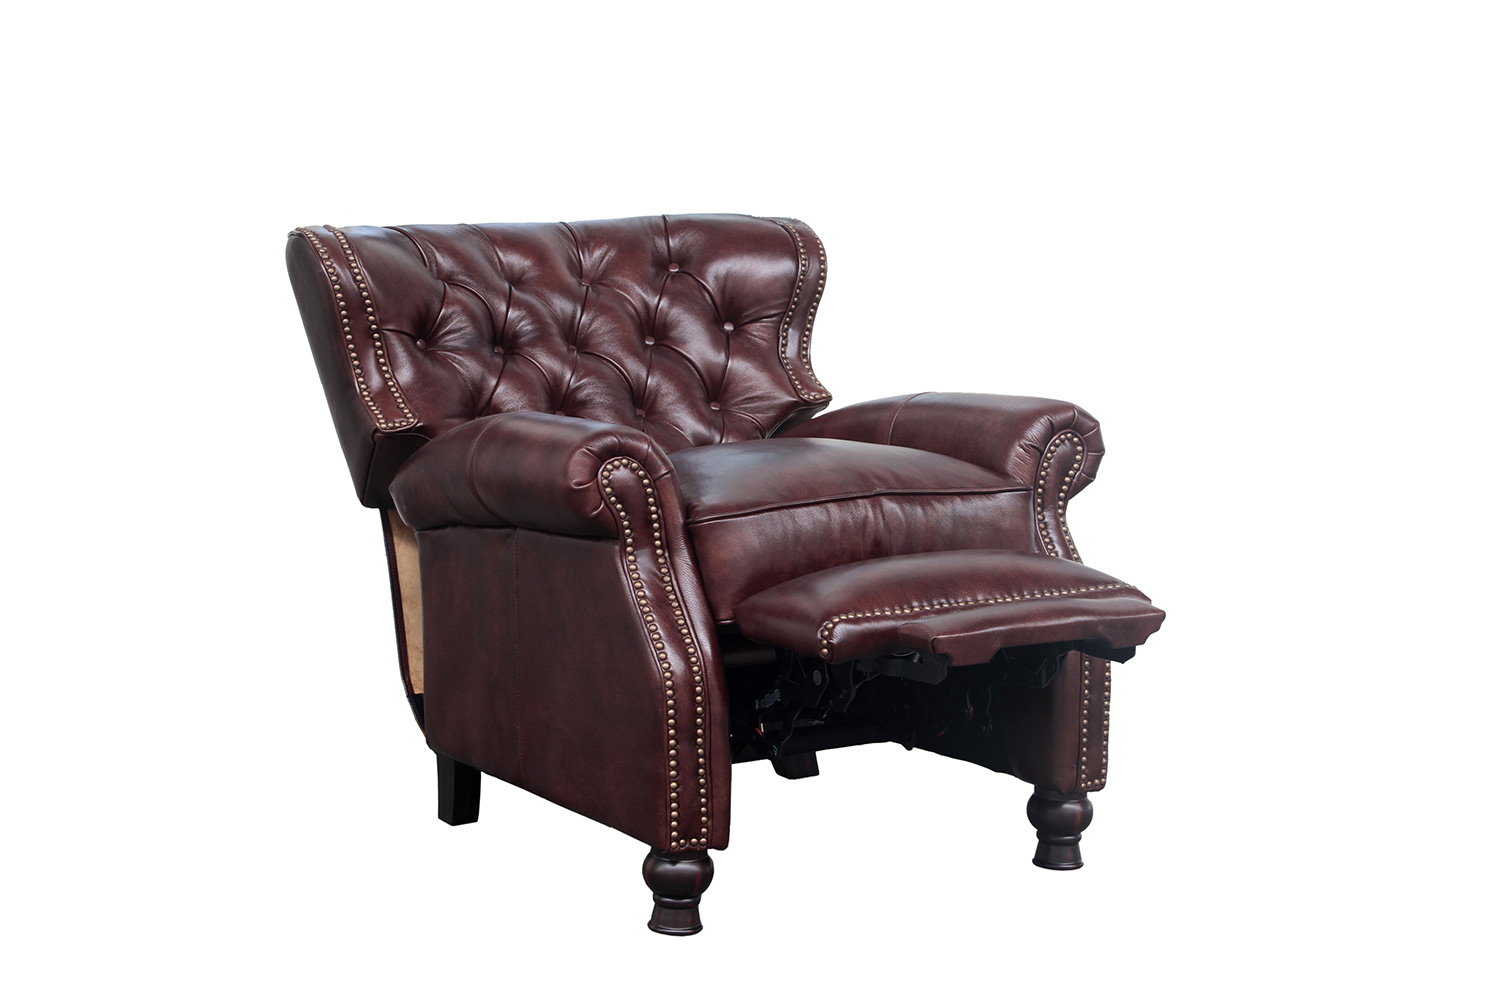 Barcalounger Presidential Recliner Chair - Wenlock Fudge/All Leather